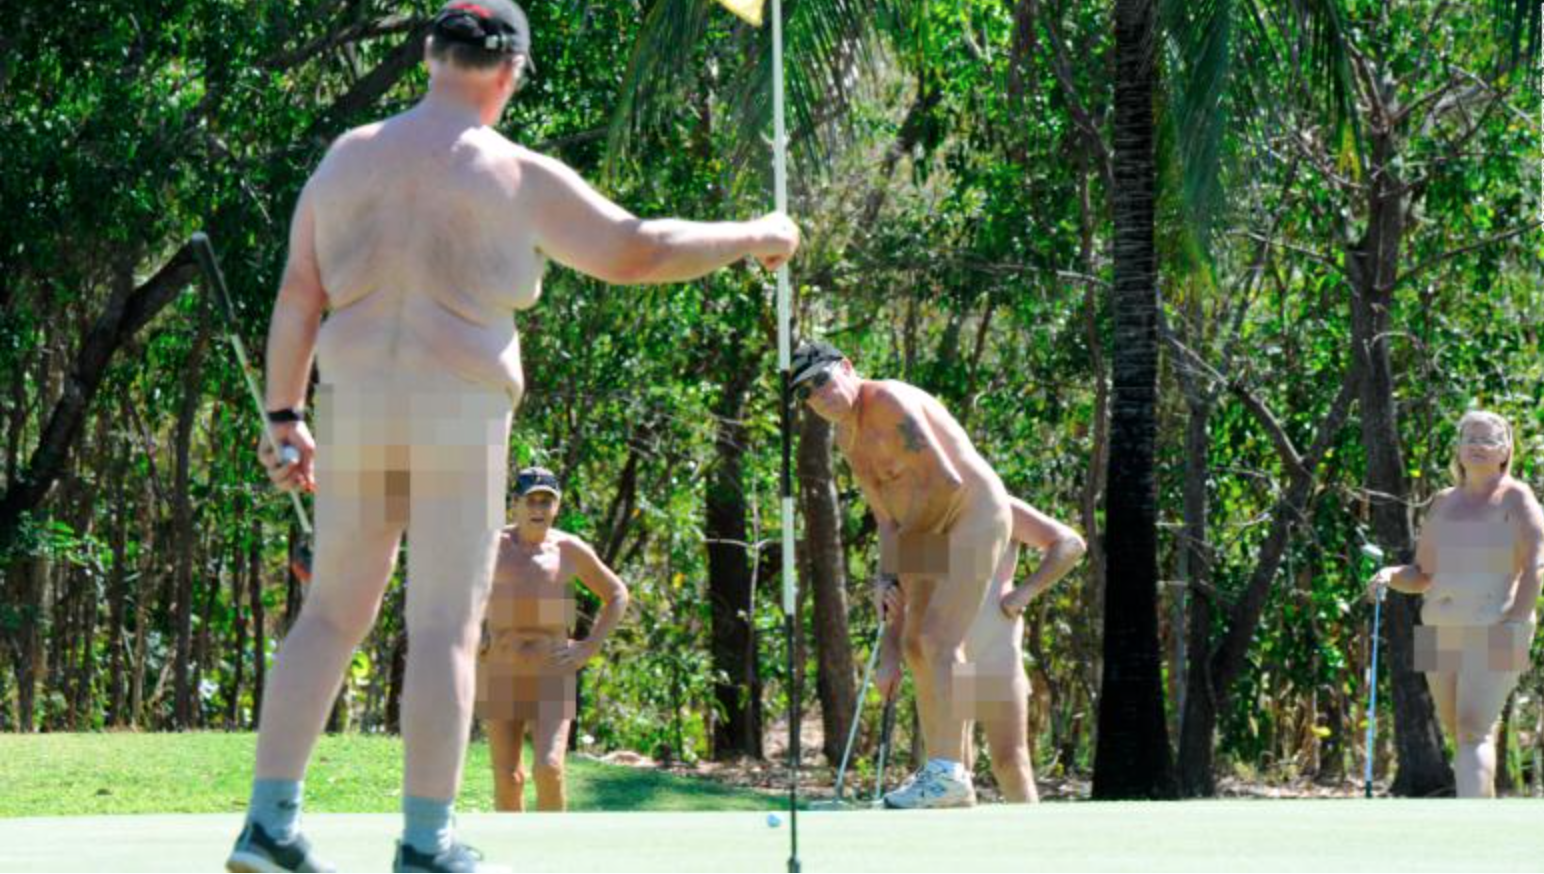 Australian Golf Course Tees Up Naked Golfing Event